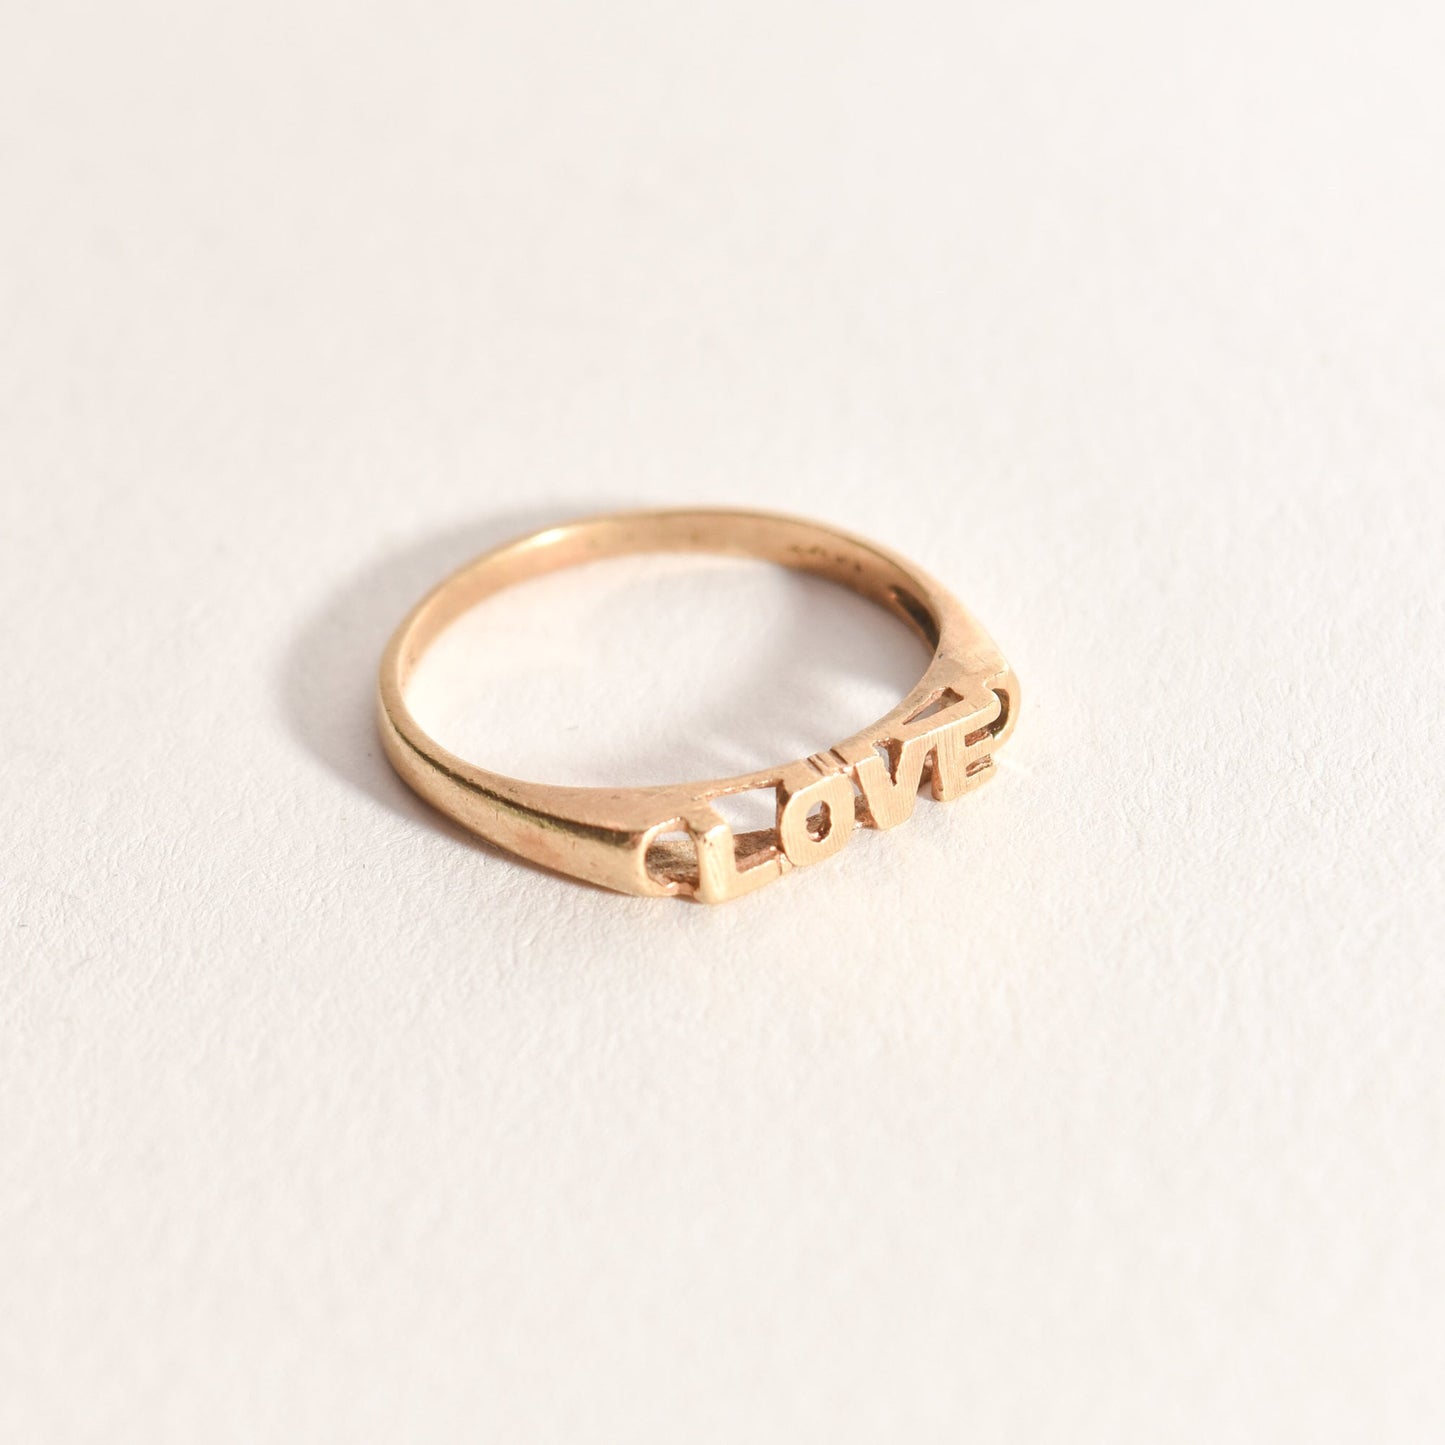 Minimalist 14K yellow gold 'LOVE' ring on a white background, cute gold stacking ring for Valentine's Day gift, size 6 3/4 US.